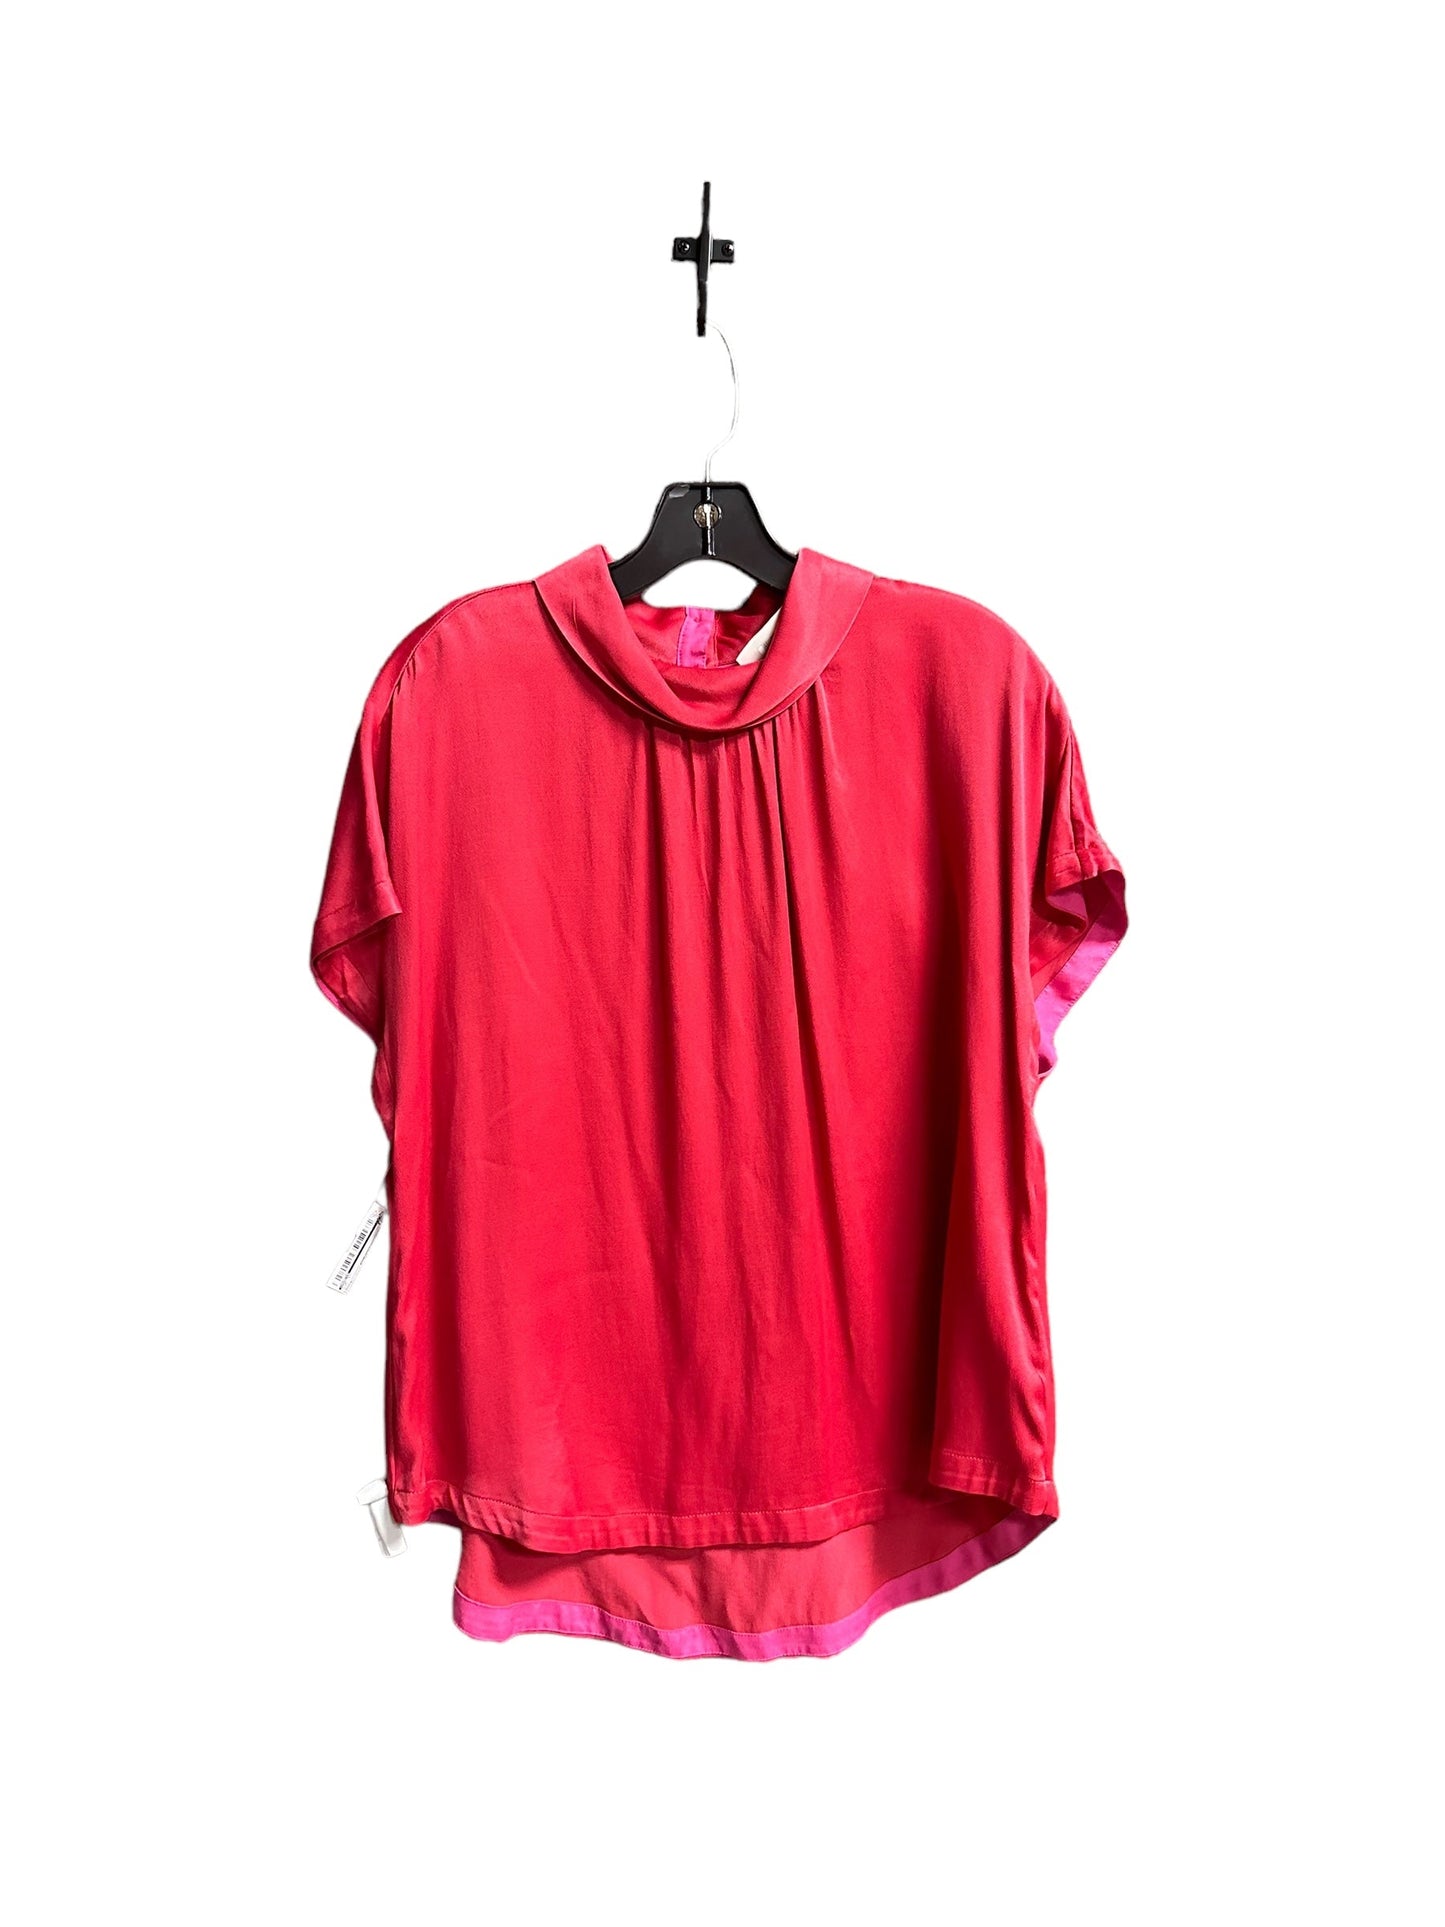 Red Top Short Sleeve Maeve, Size L